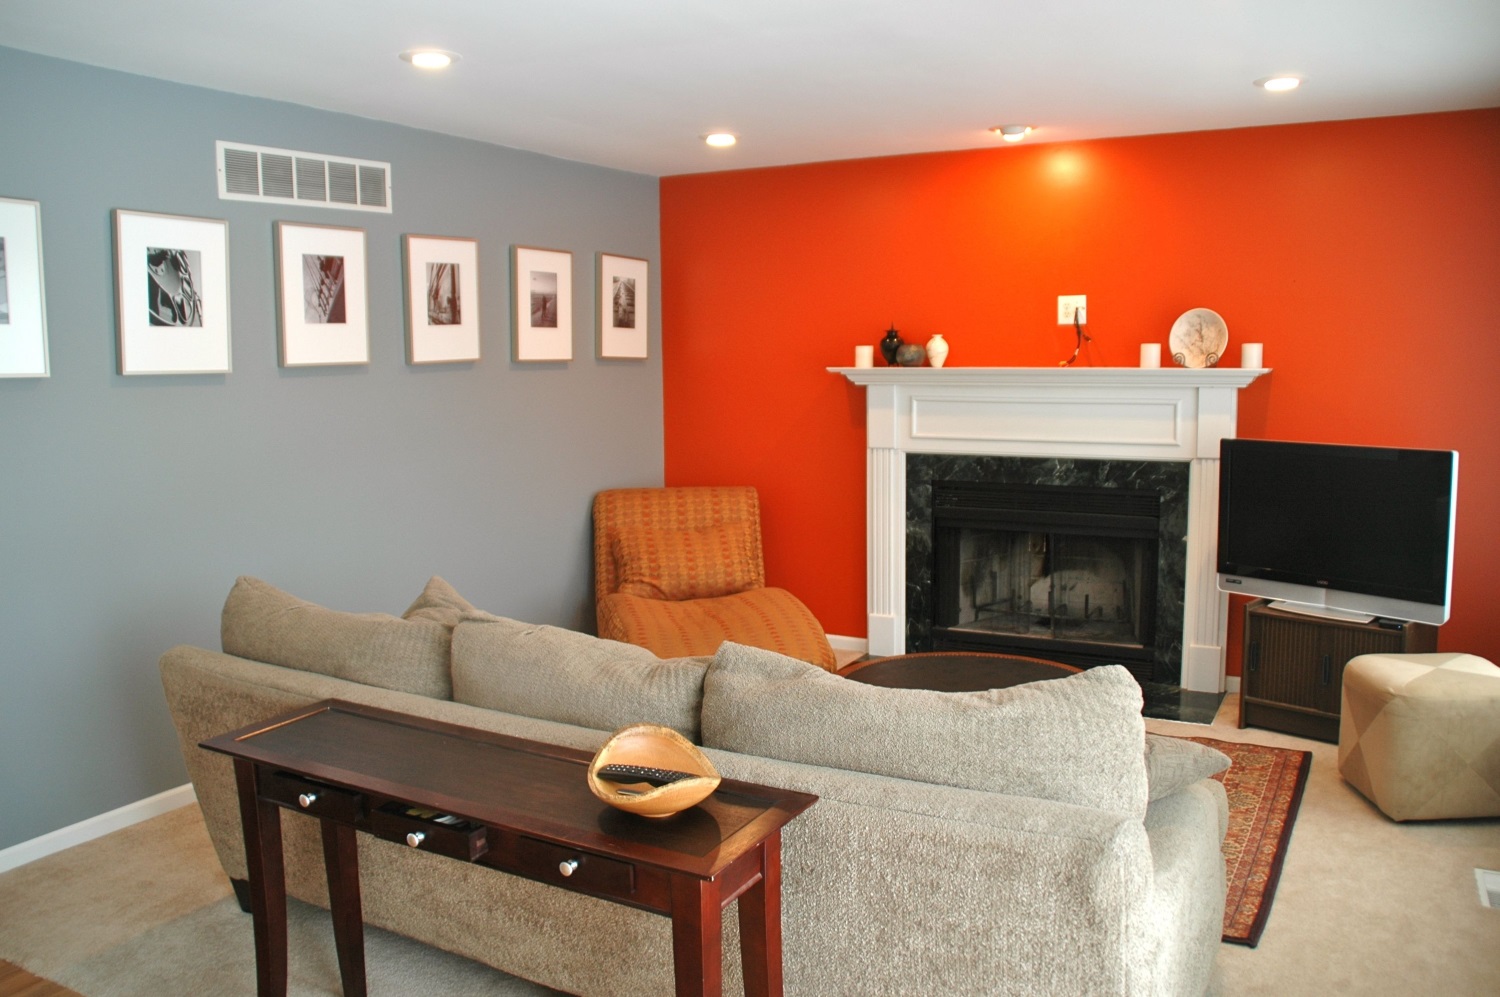 Partly orange living room style